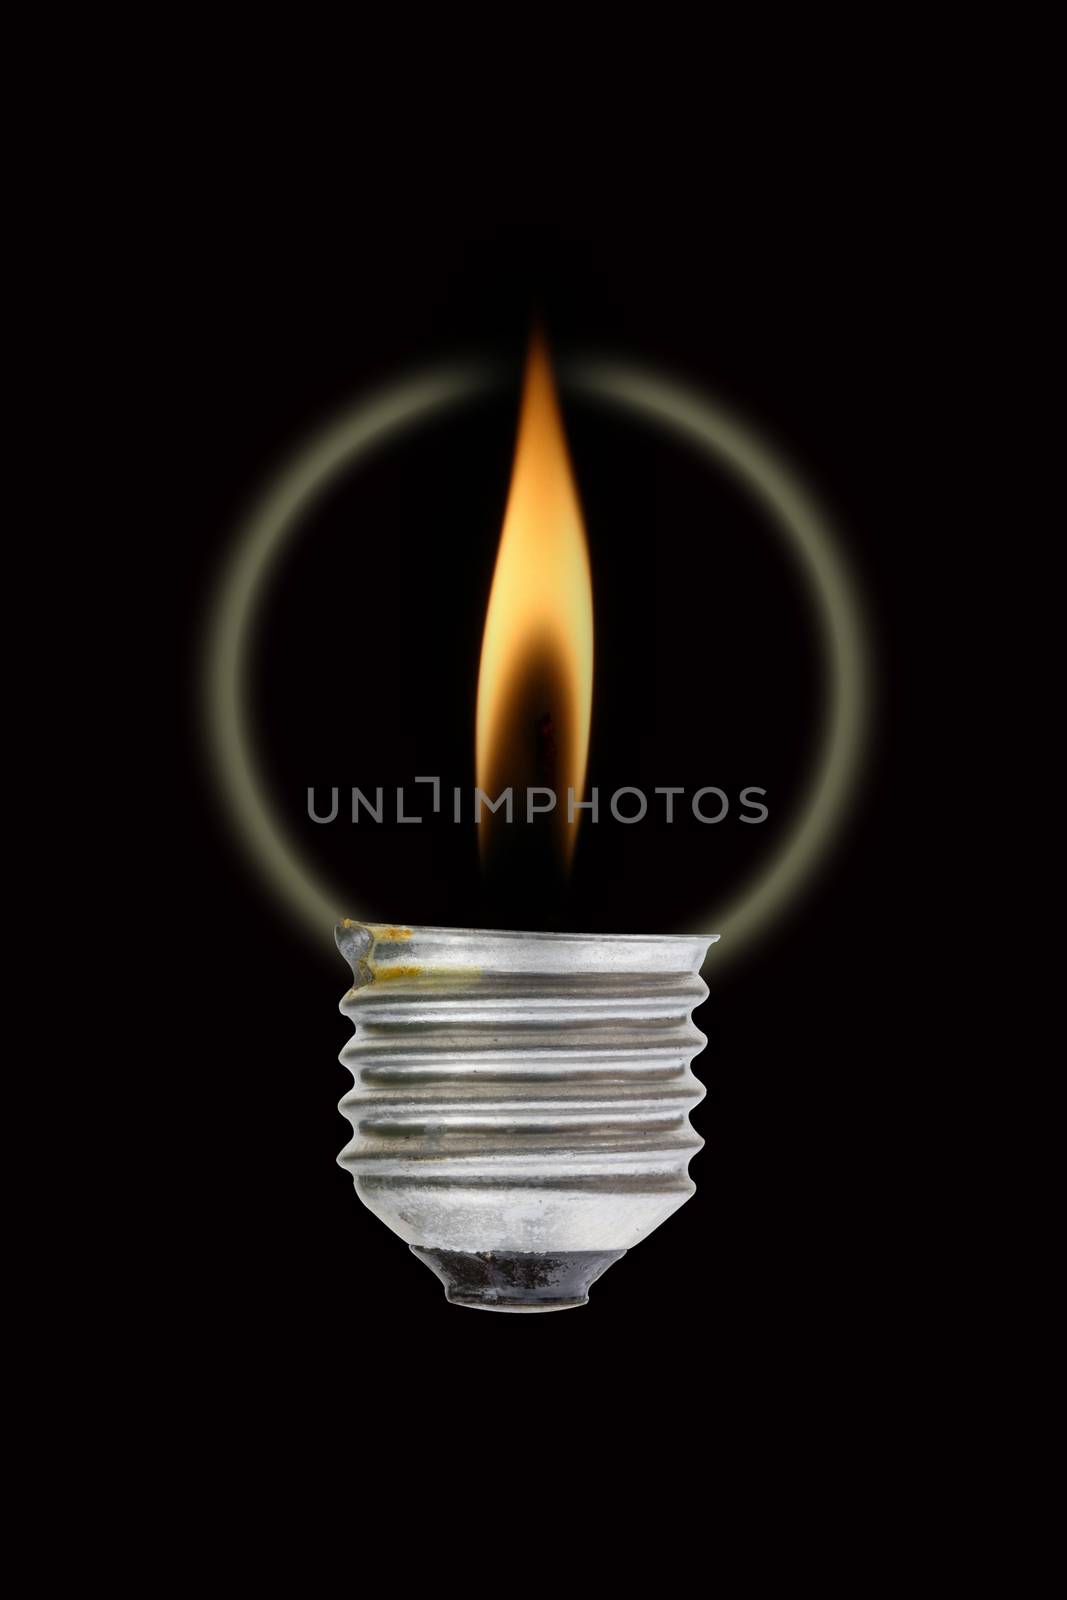 Fire and smoke in side the light bulb. Concept for energy consumption and environmental awareness